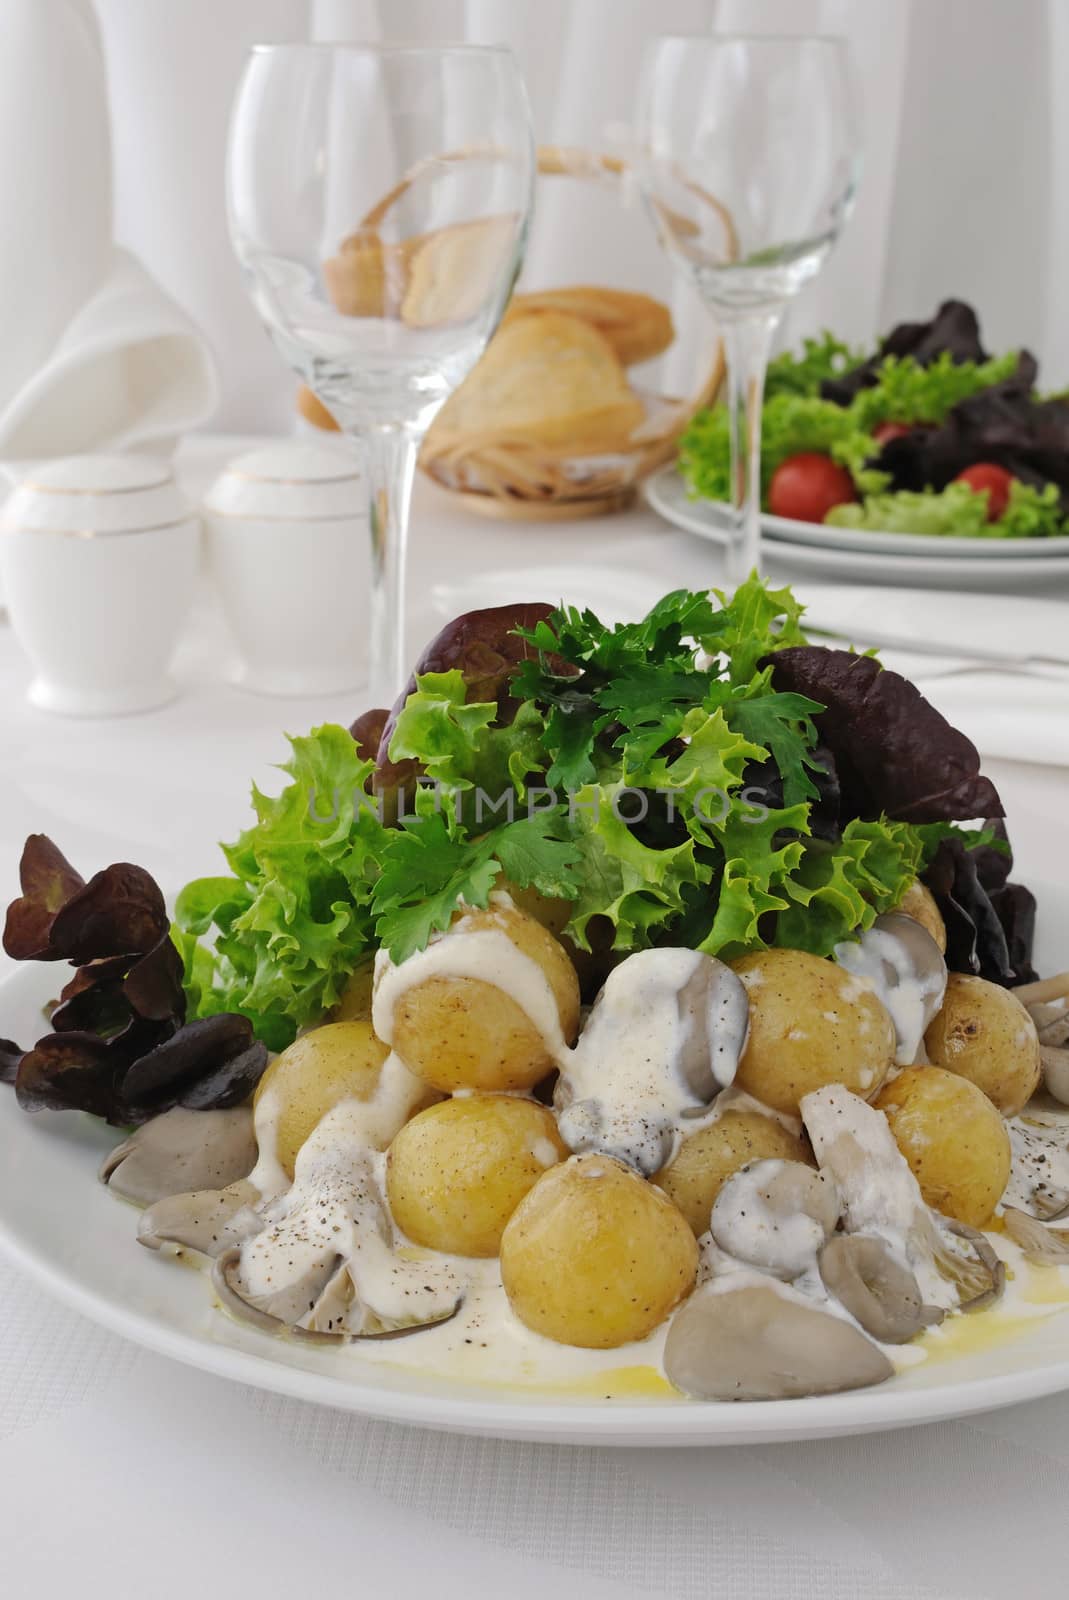  Potatoes with mushrooms and cream sauce by Apolonia